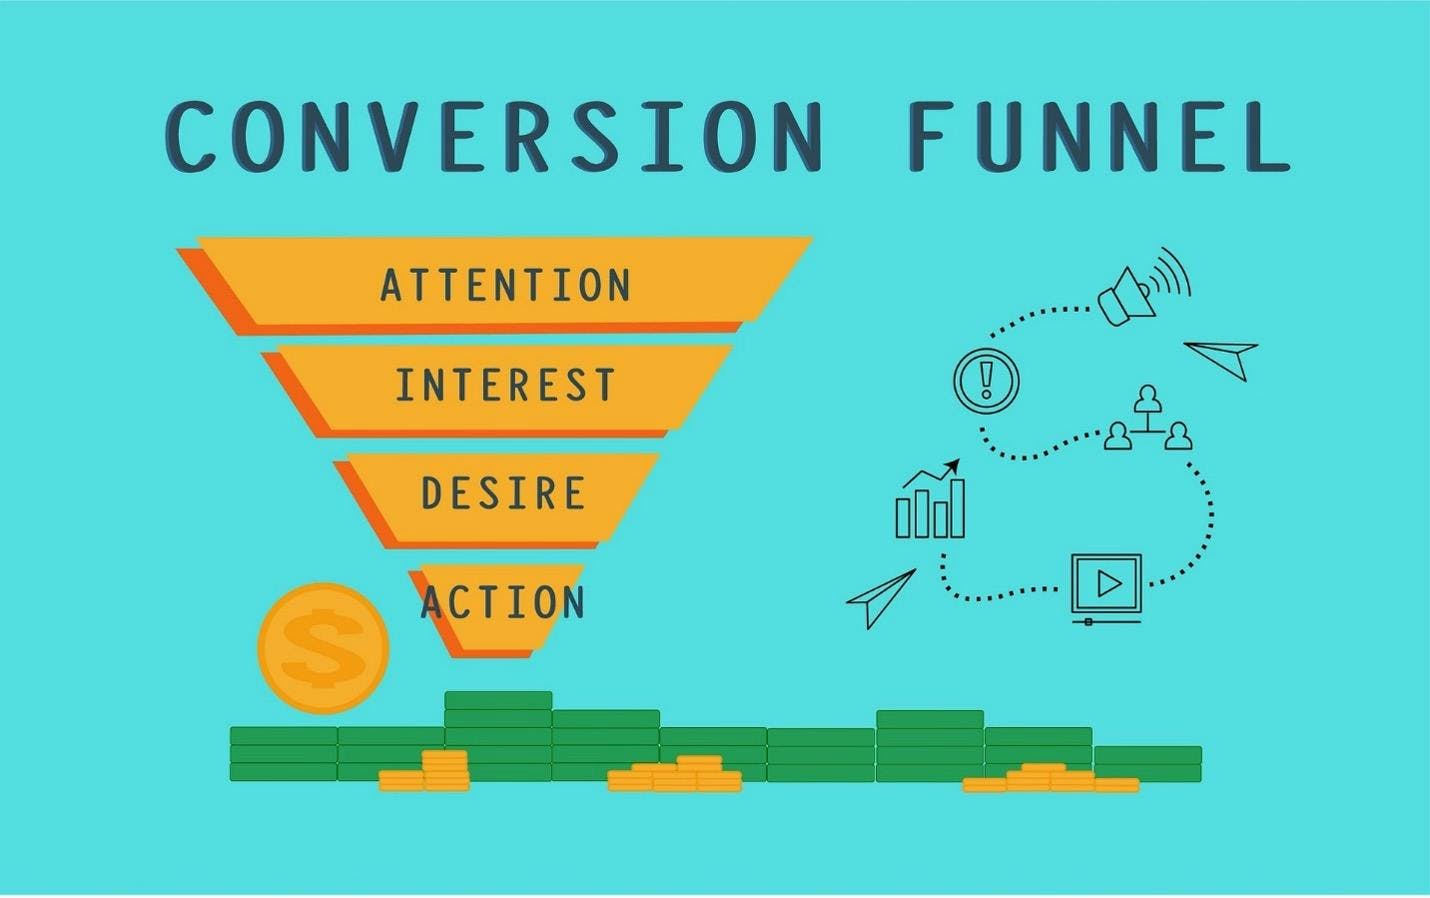 An illustration of the marketing funnels multiple steps: Attention, Interest, Desire, Action.